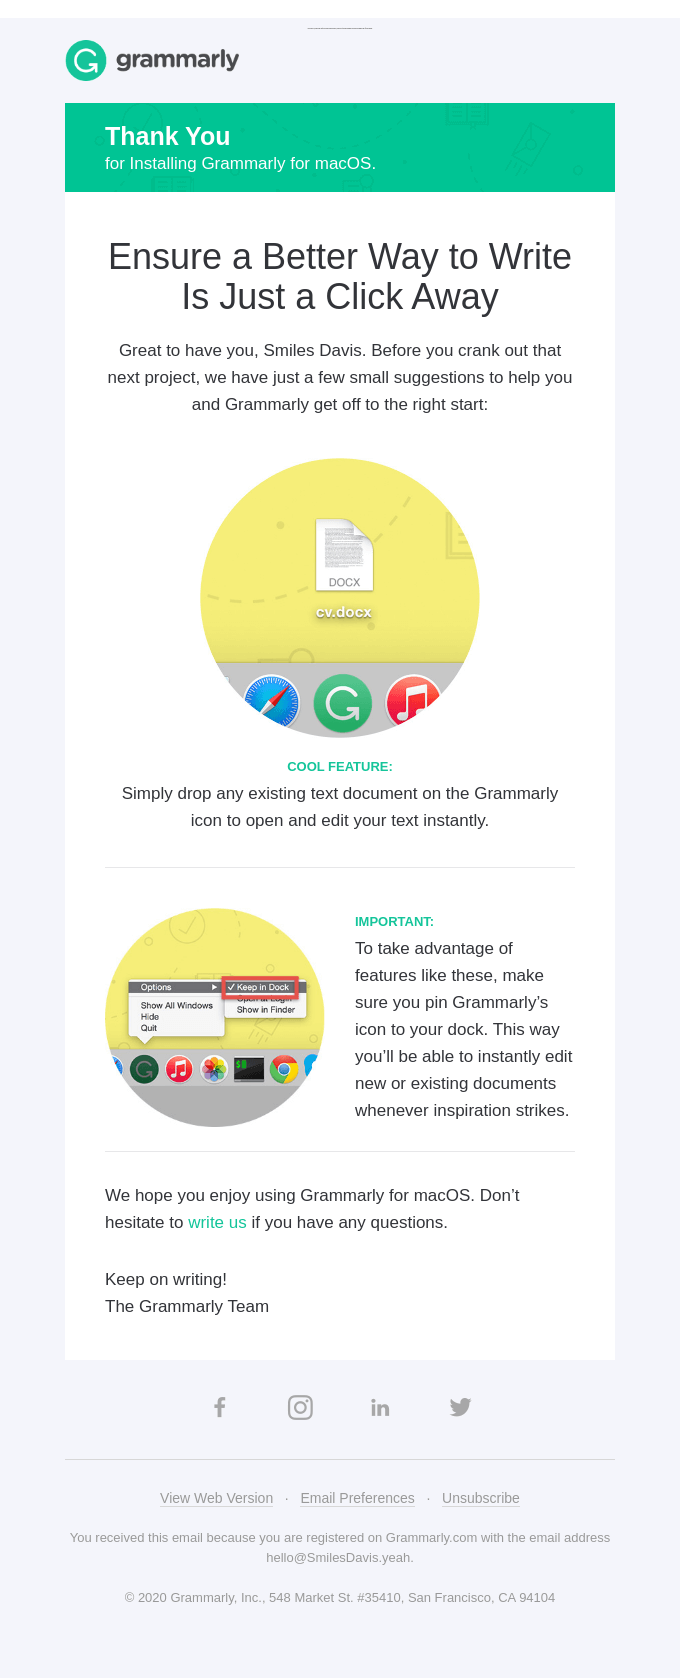 Thank you for installing Grammarly's Native App!